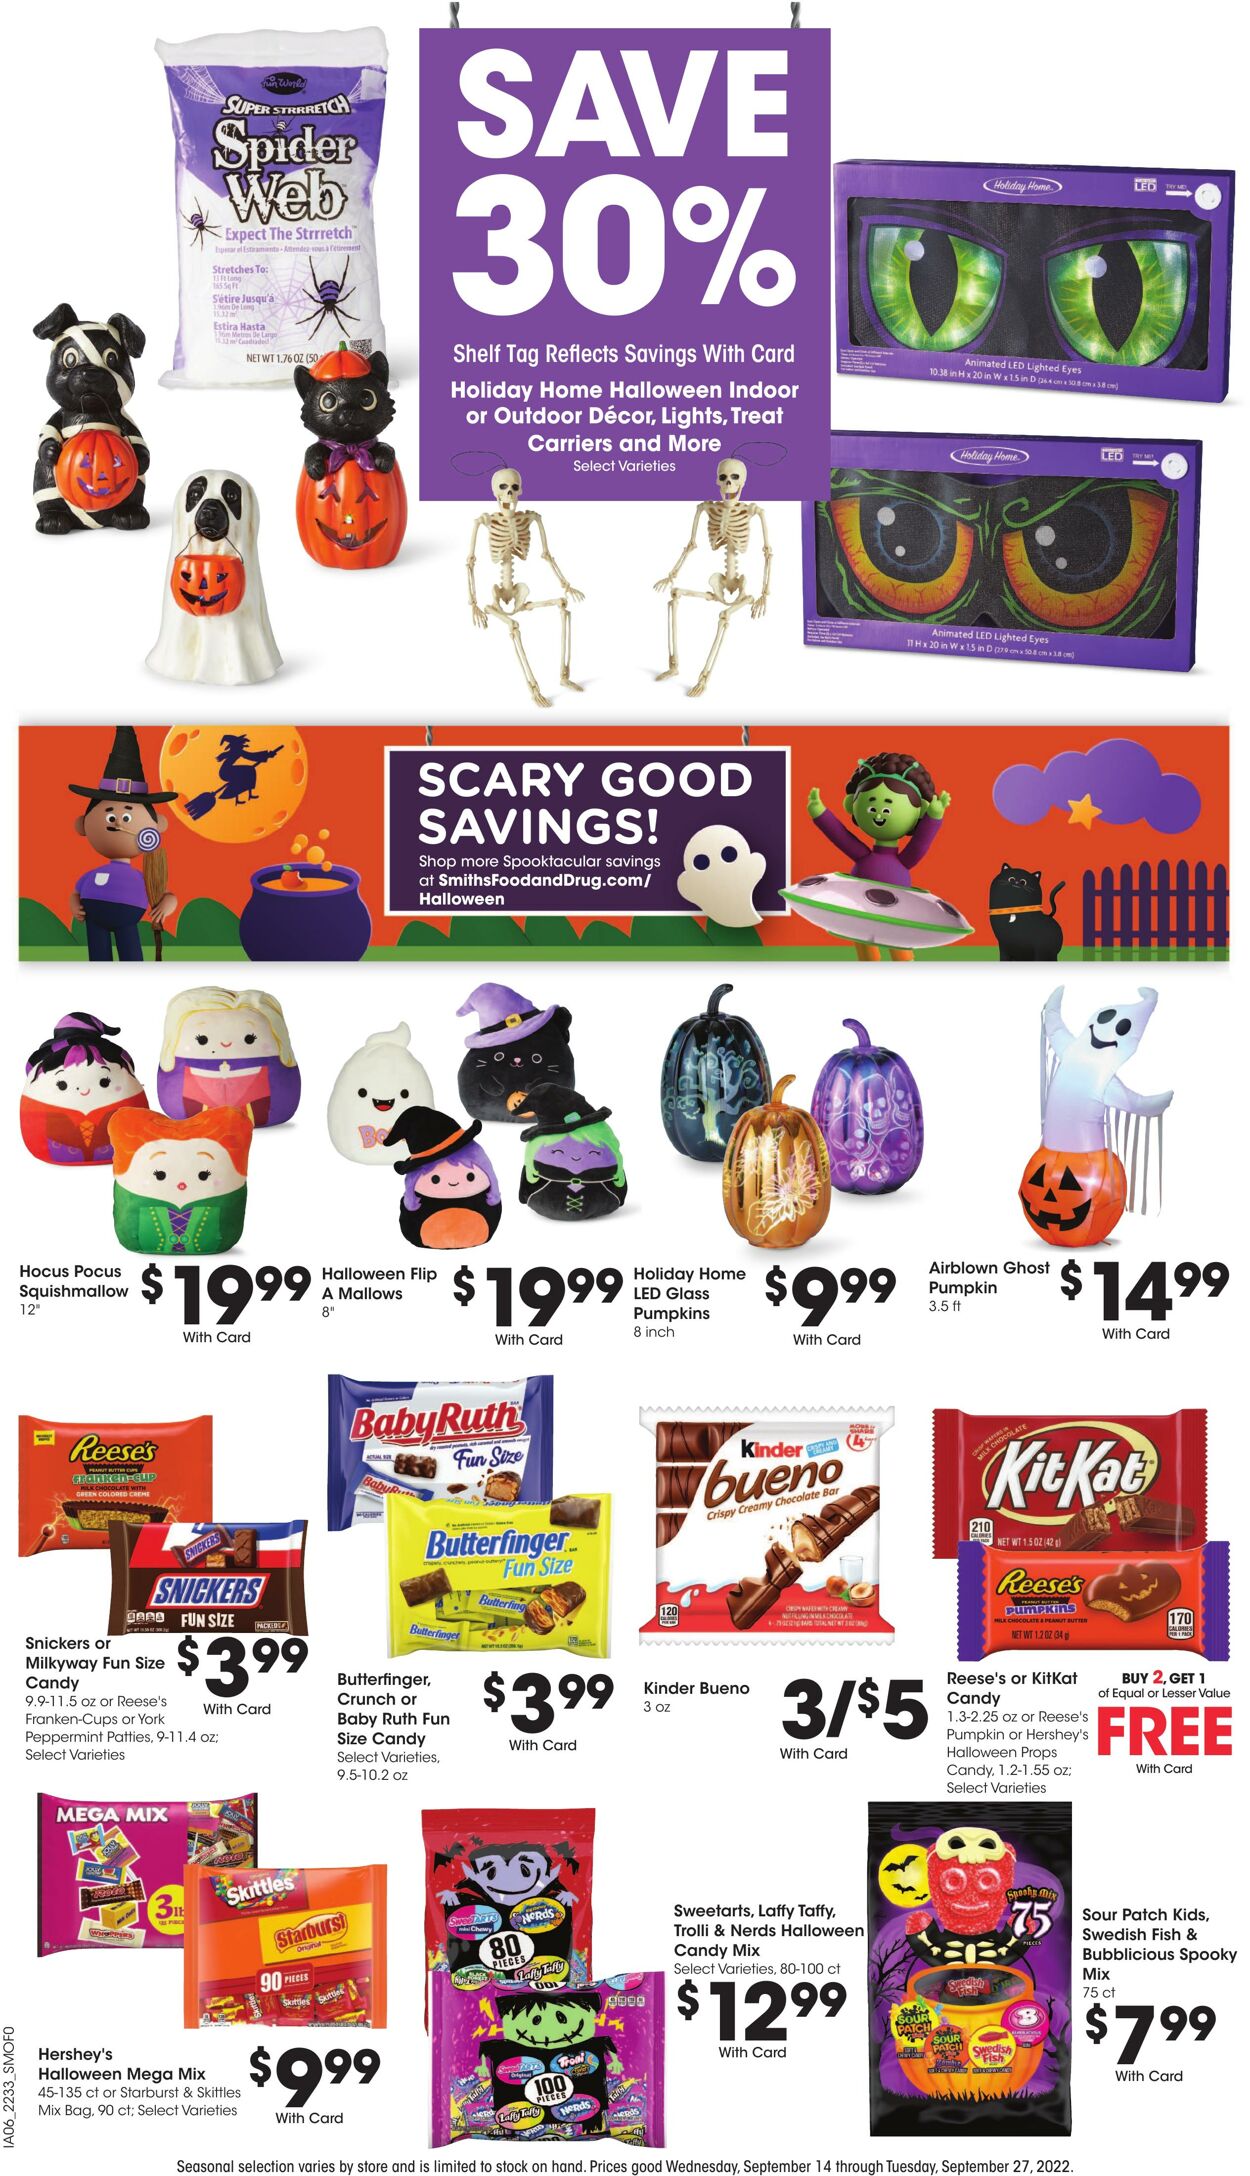 Weekly ad Smith’s Food and Drug 09/14/2022 - 09/20/2022